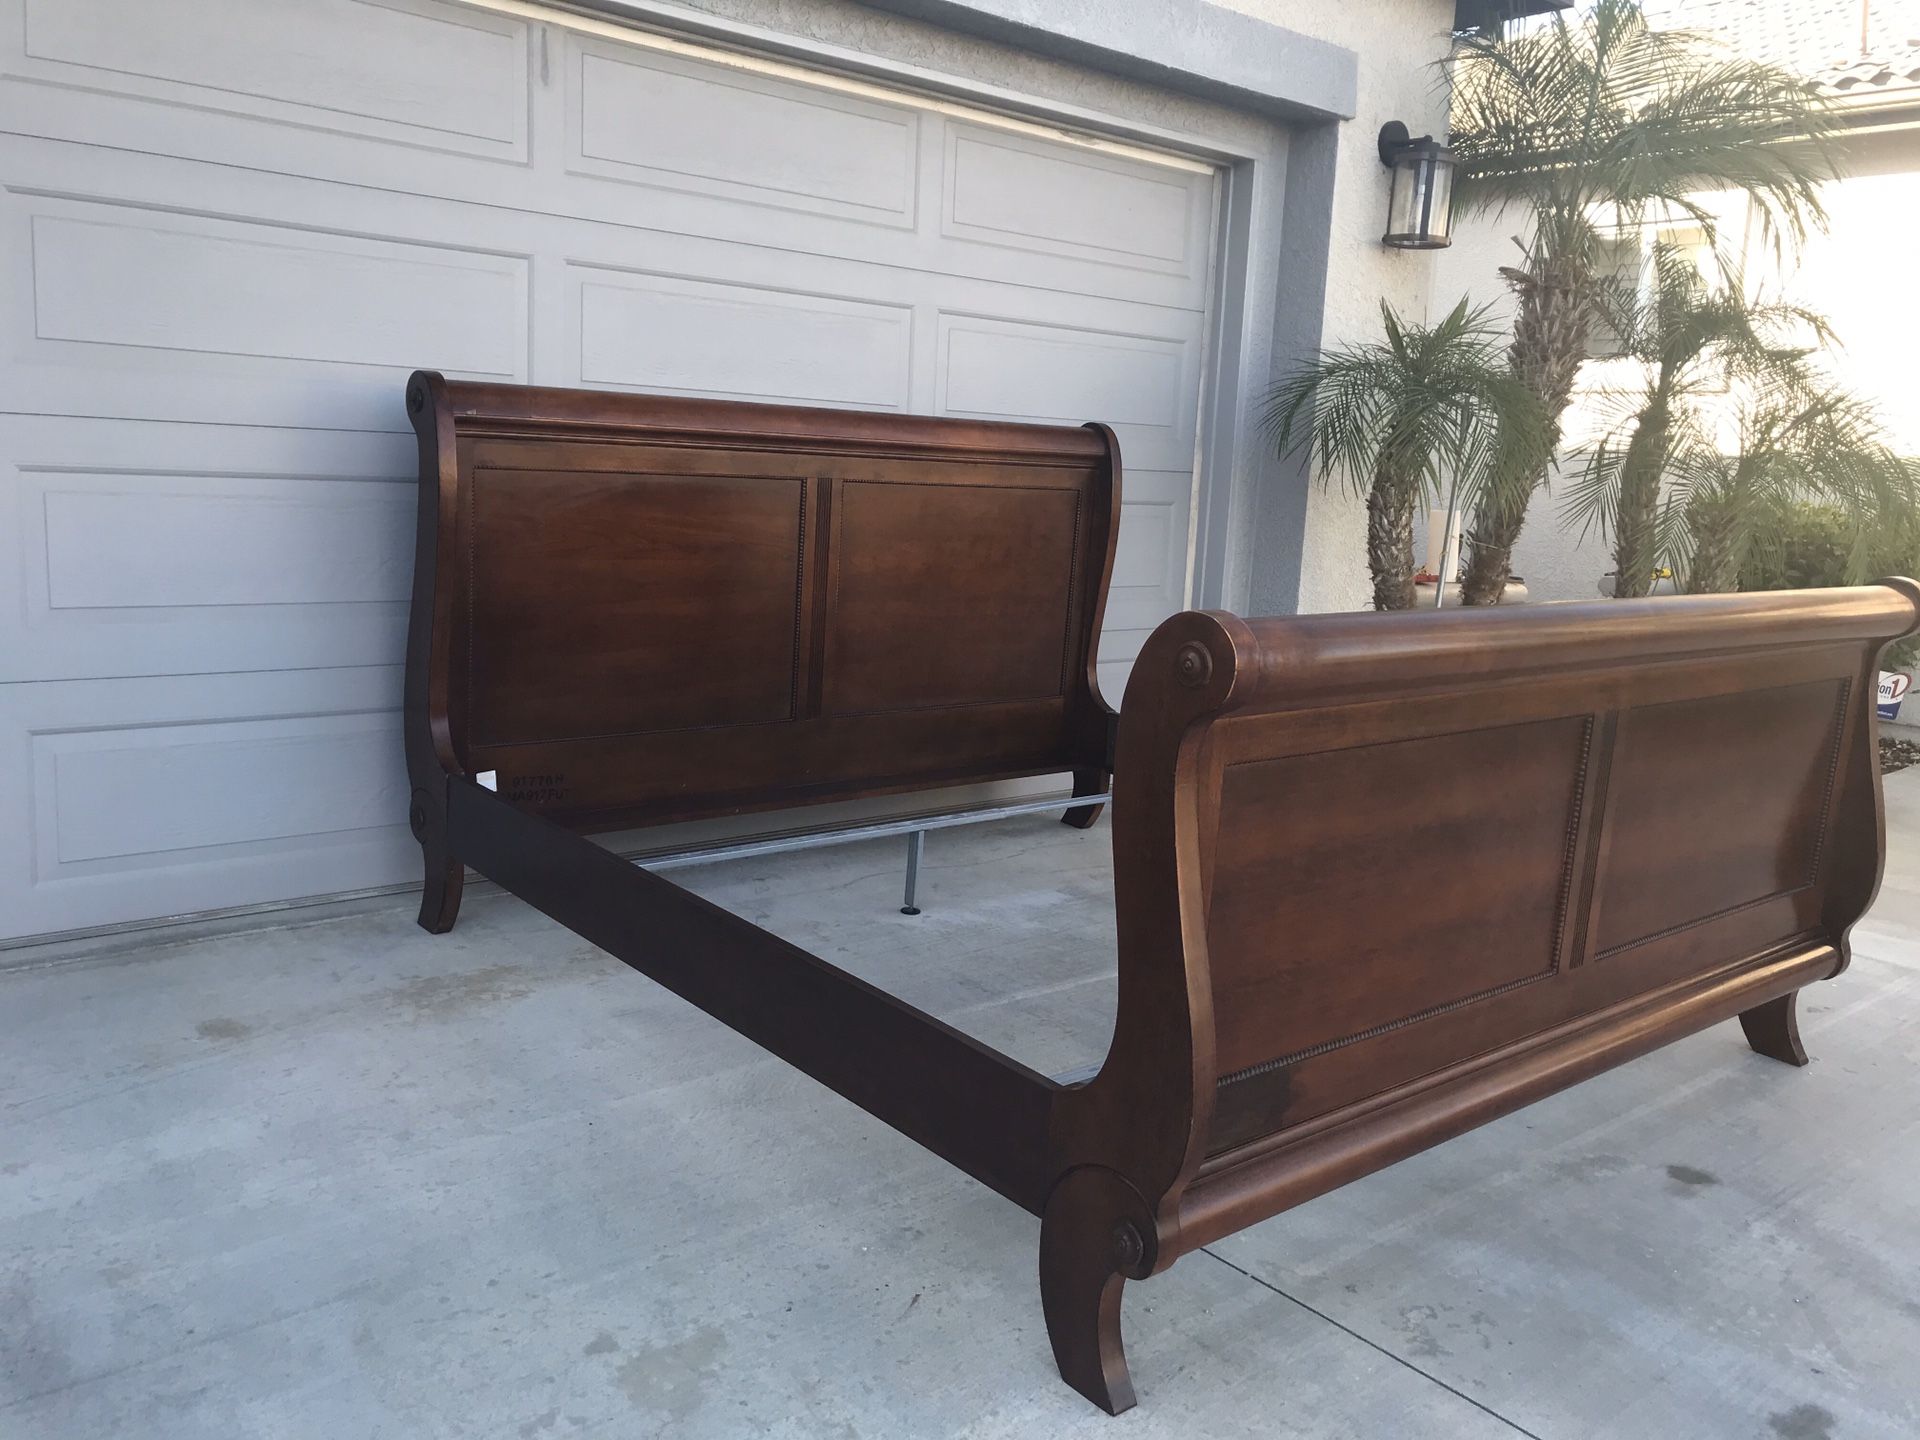 King size sleigh bed frame. Real wood.